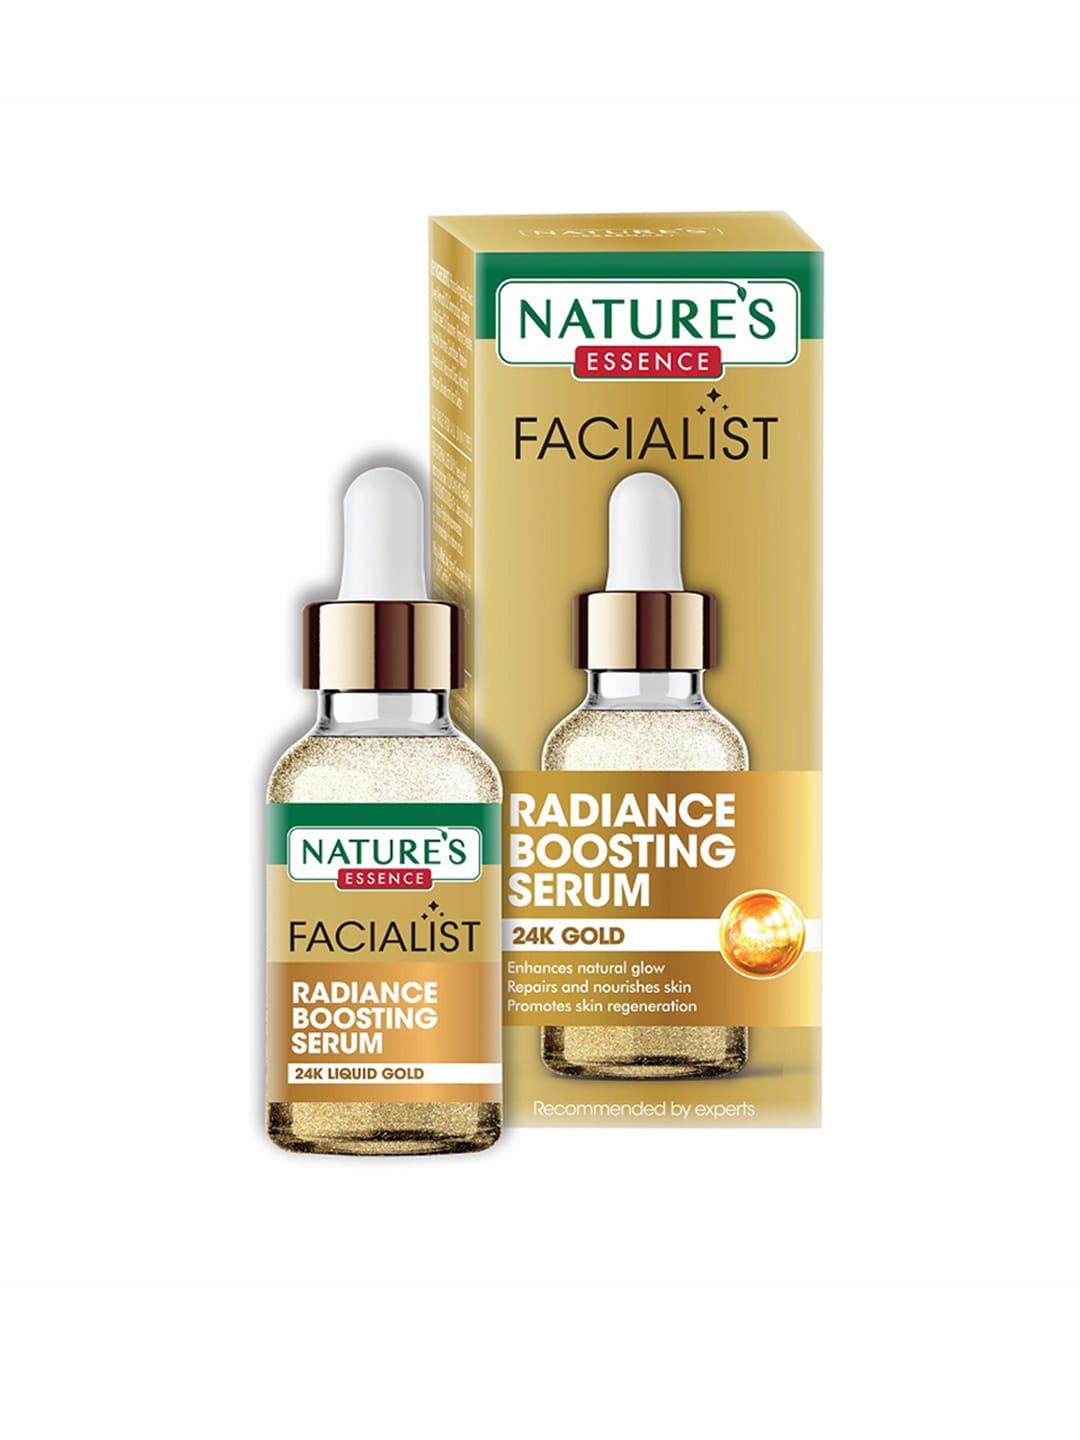 Natures Essence Facialist Radiance Boosting Serum with 24K Liquid Gold & Almond Oil - 30ml